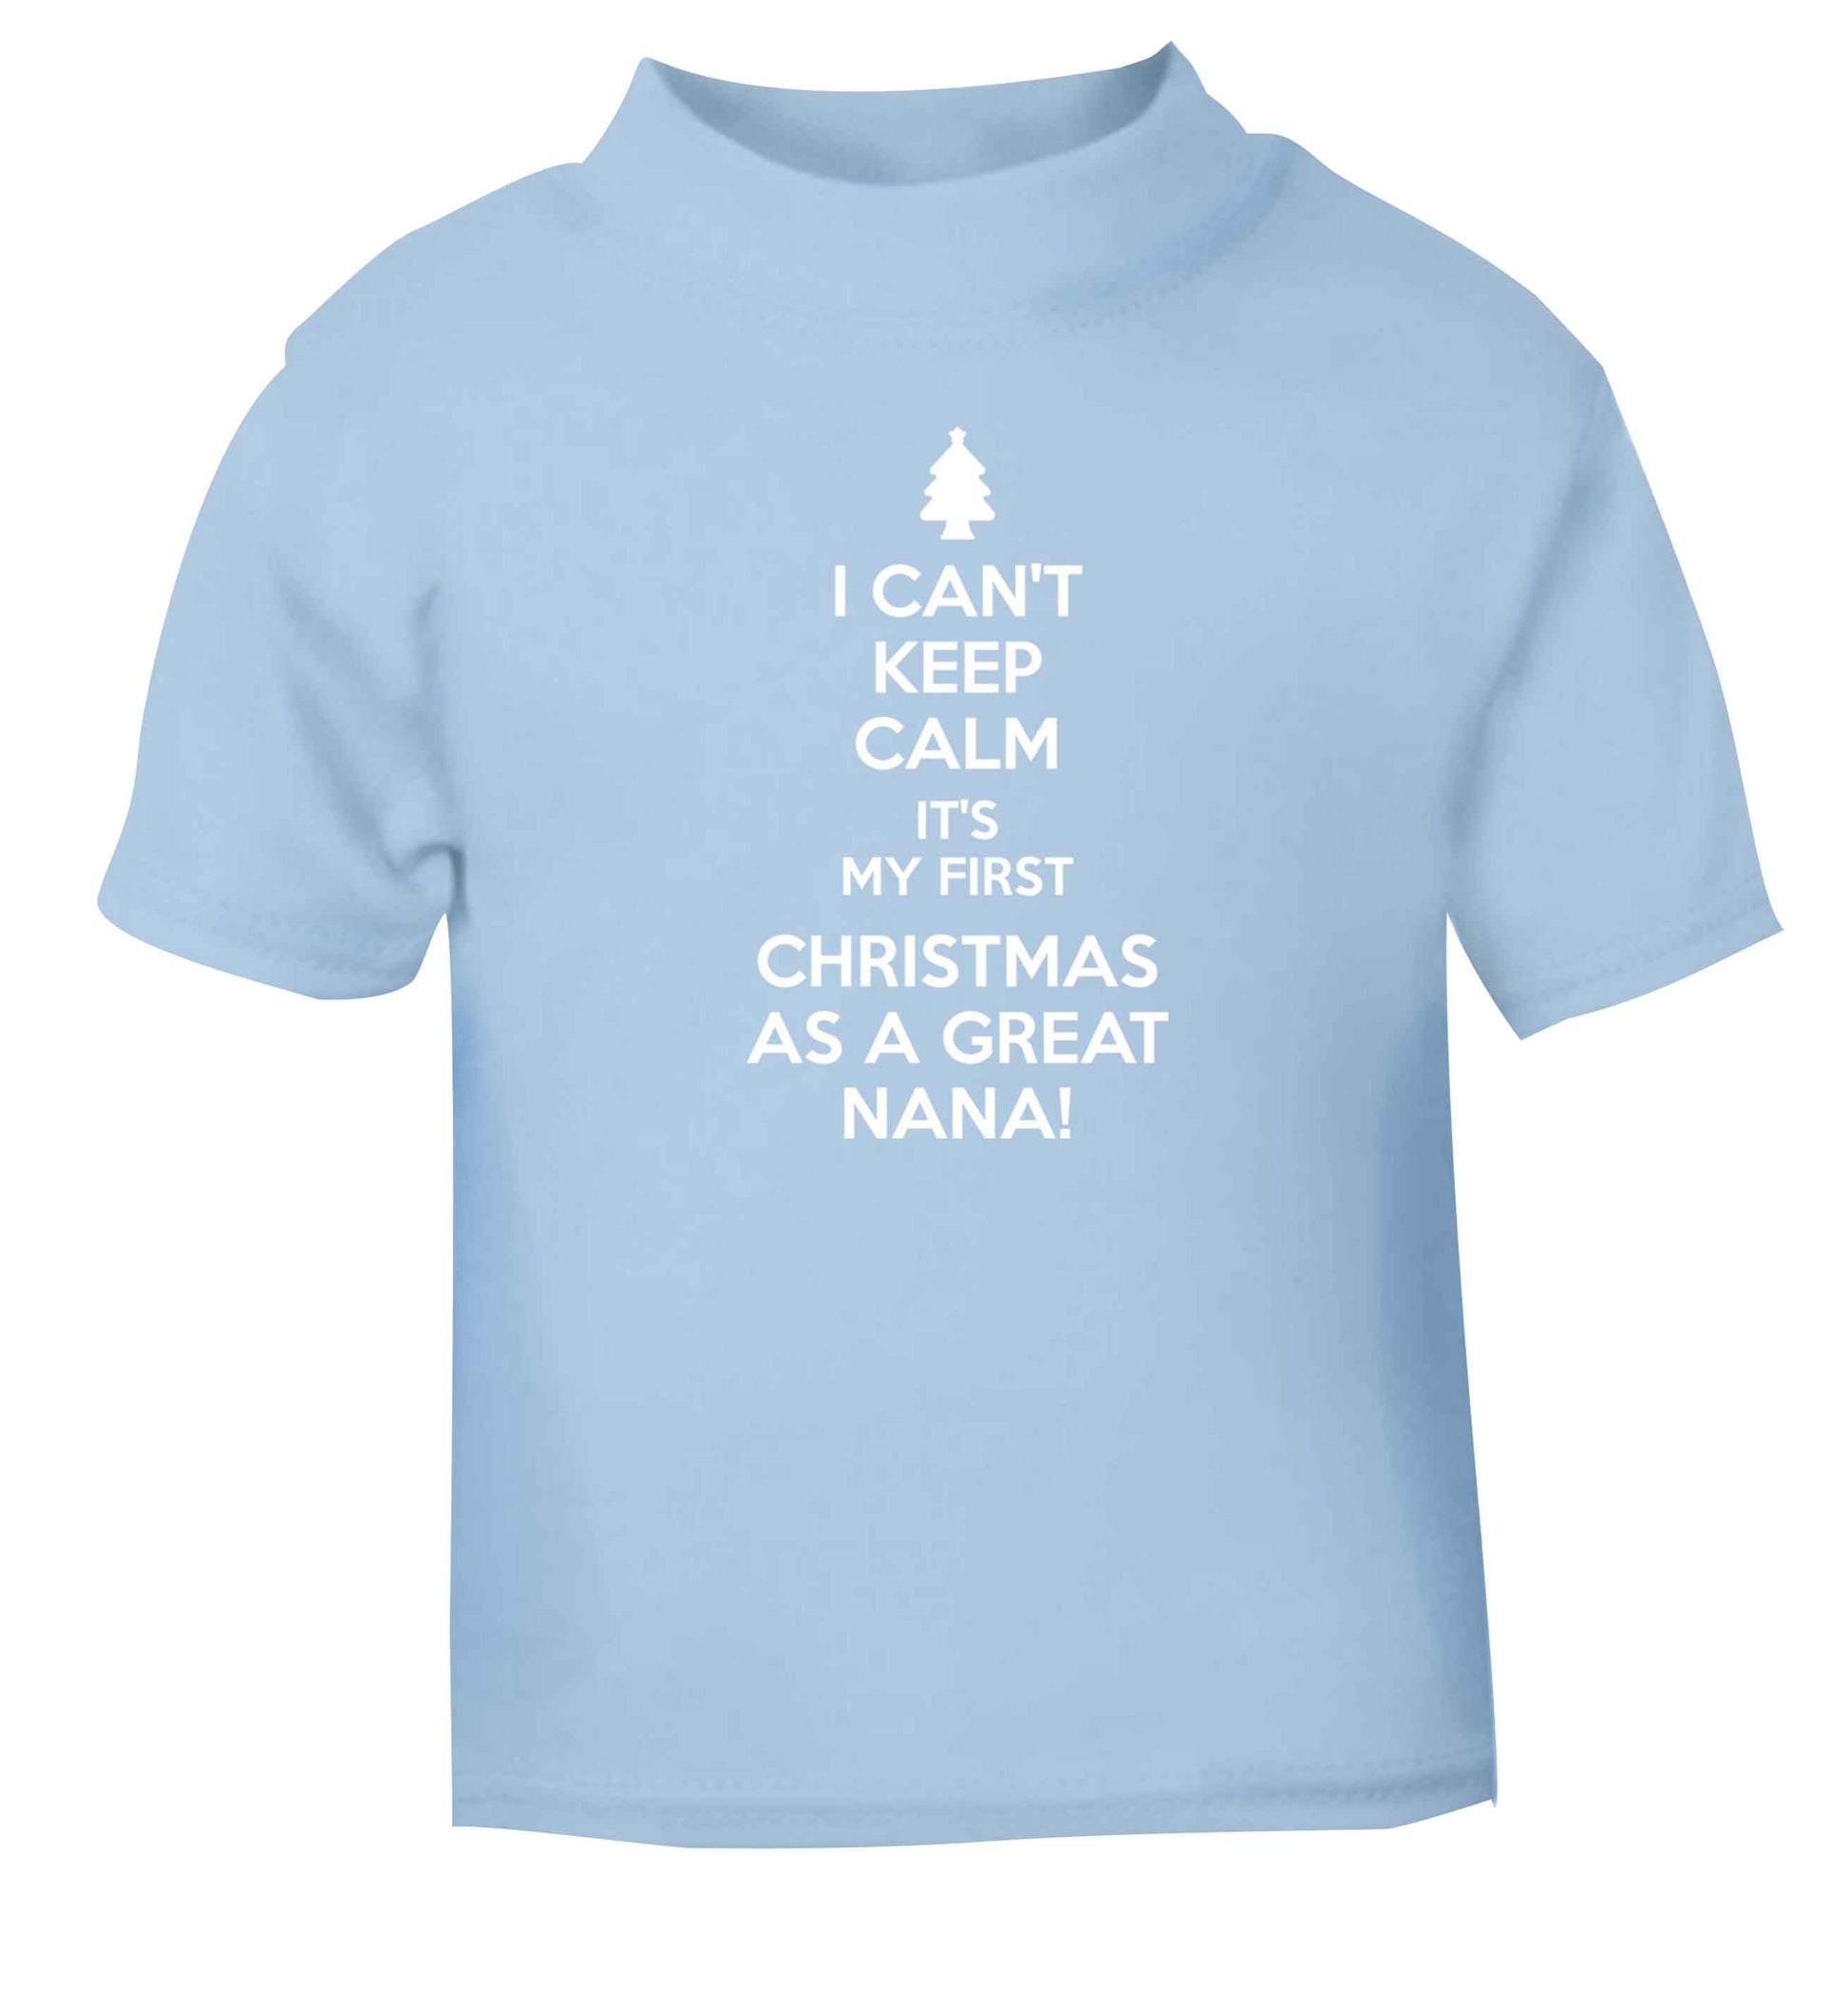 I can't keep calm it's my first Christmas as a great nana! light blue Baby Toddler Tshirt 2 Years